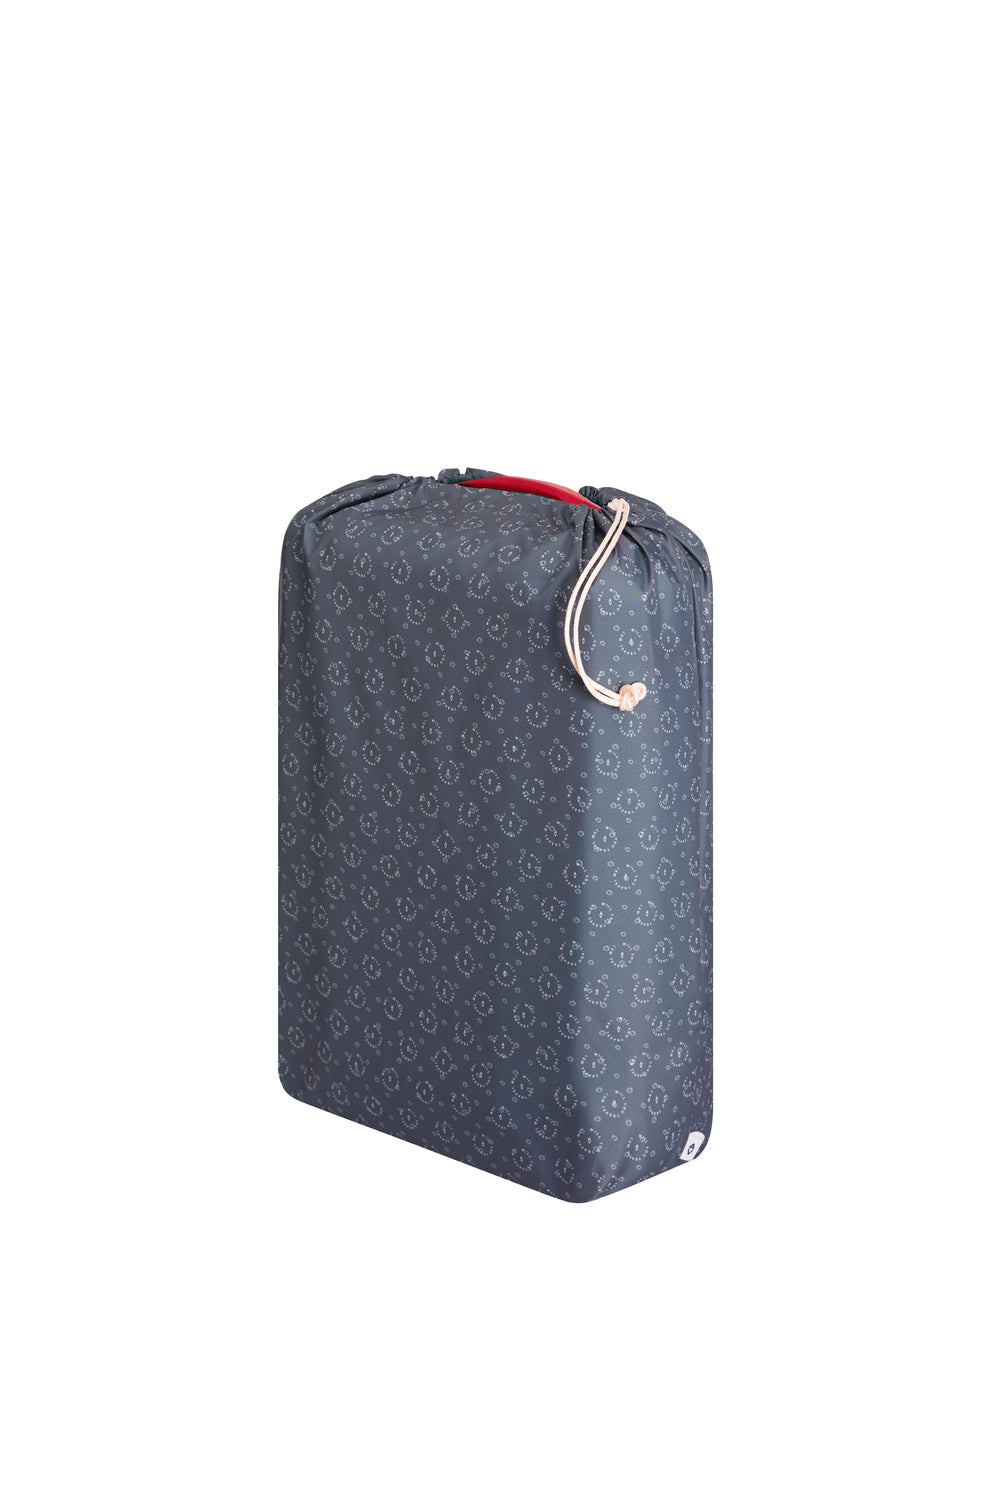 Smart suitcase Medium size Red Kiss HAVE A REST